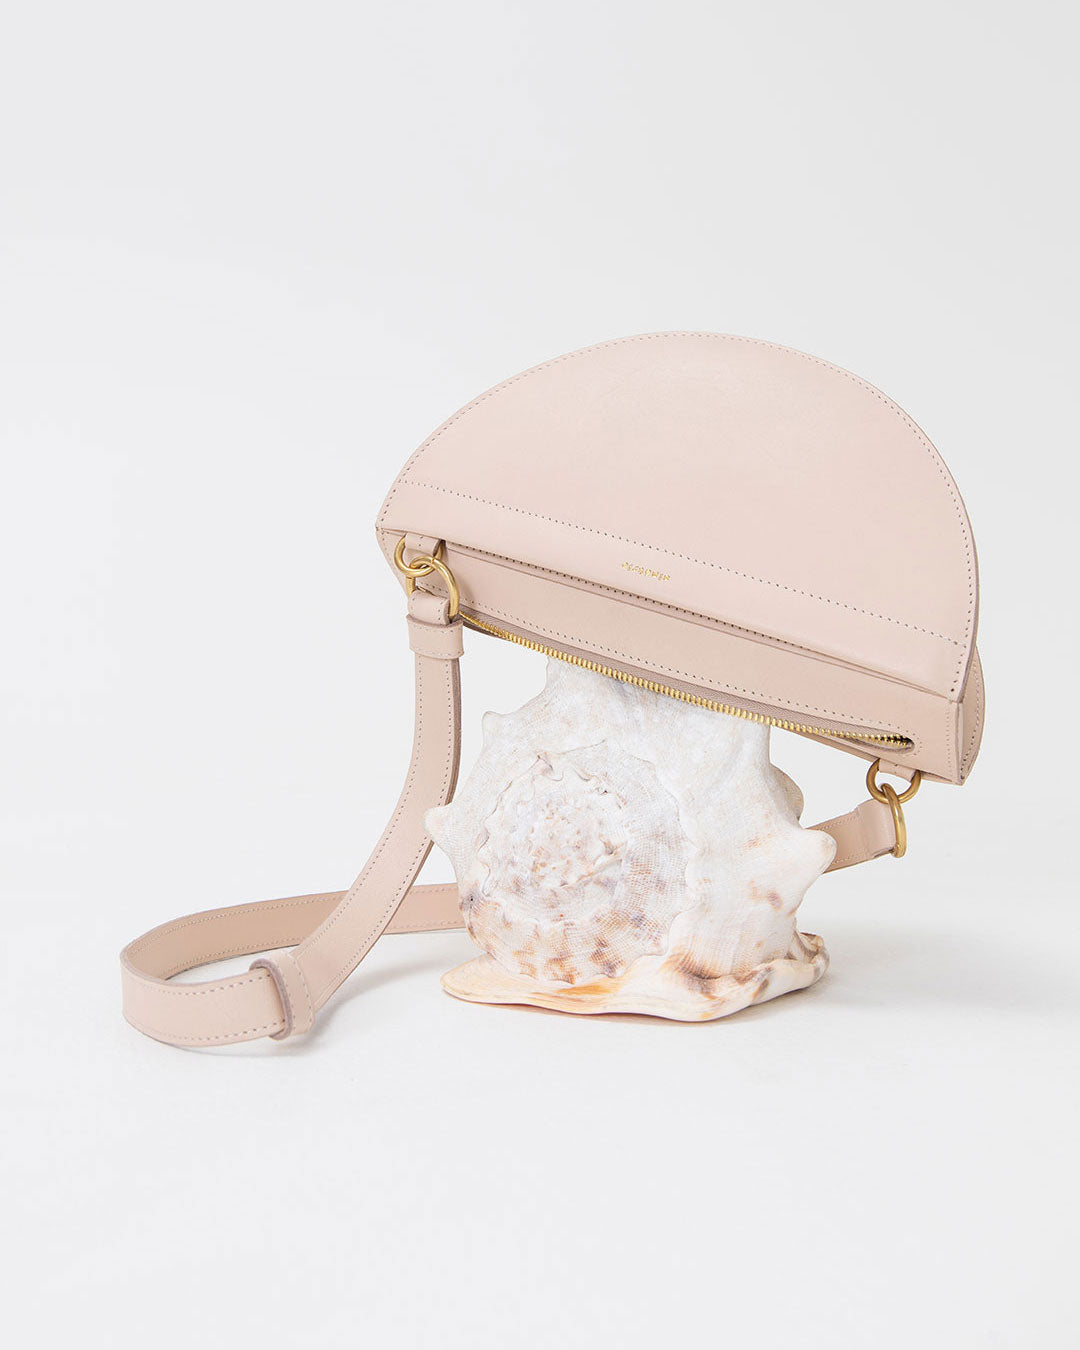 thick lune bag / shell